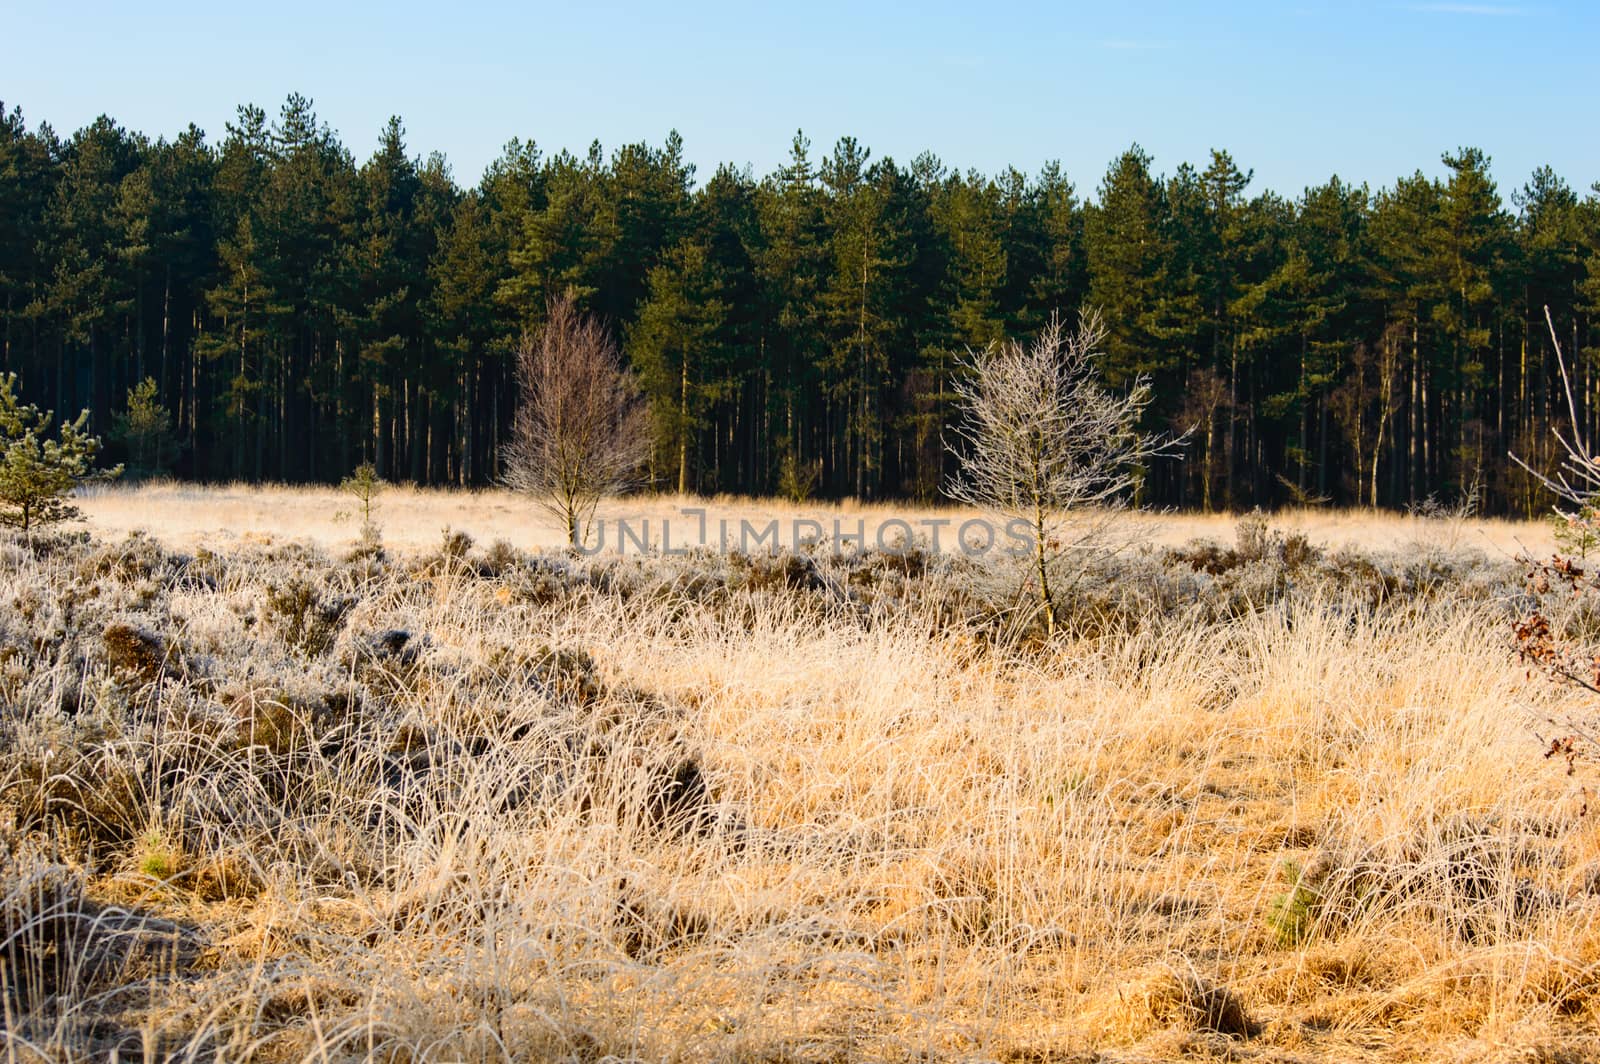 Scenic landscape with colorful dried golden grass in front of a verdant green forest on a sunny clear blue sky day